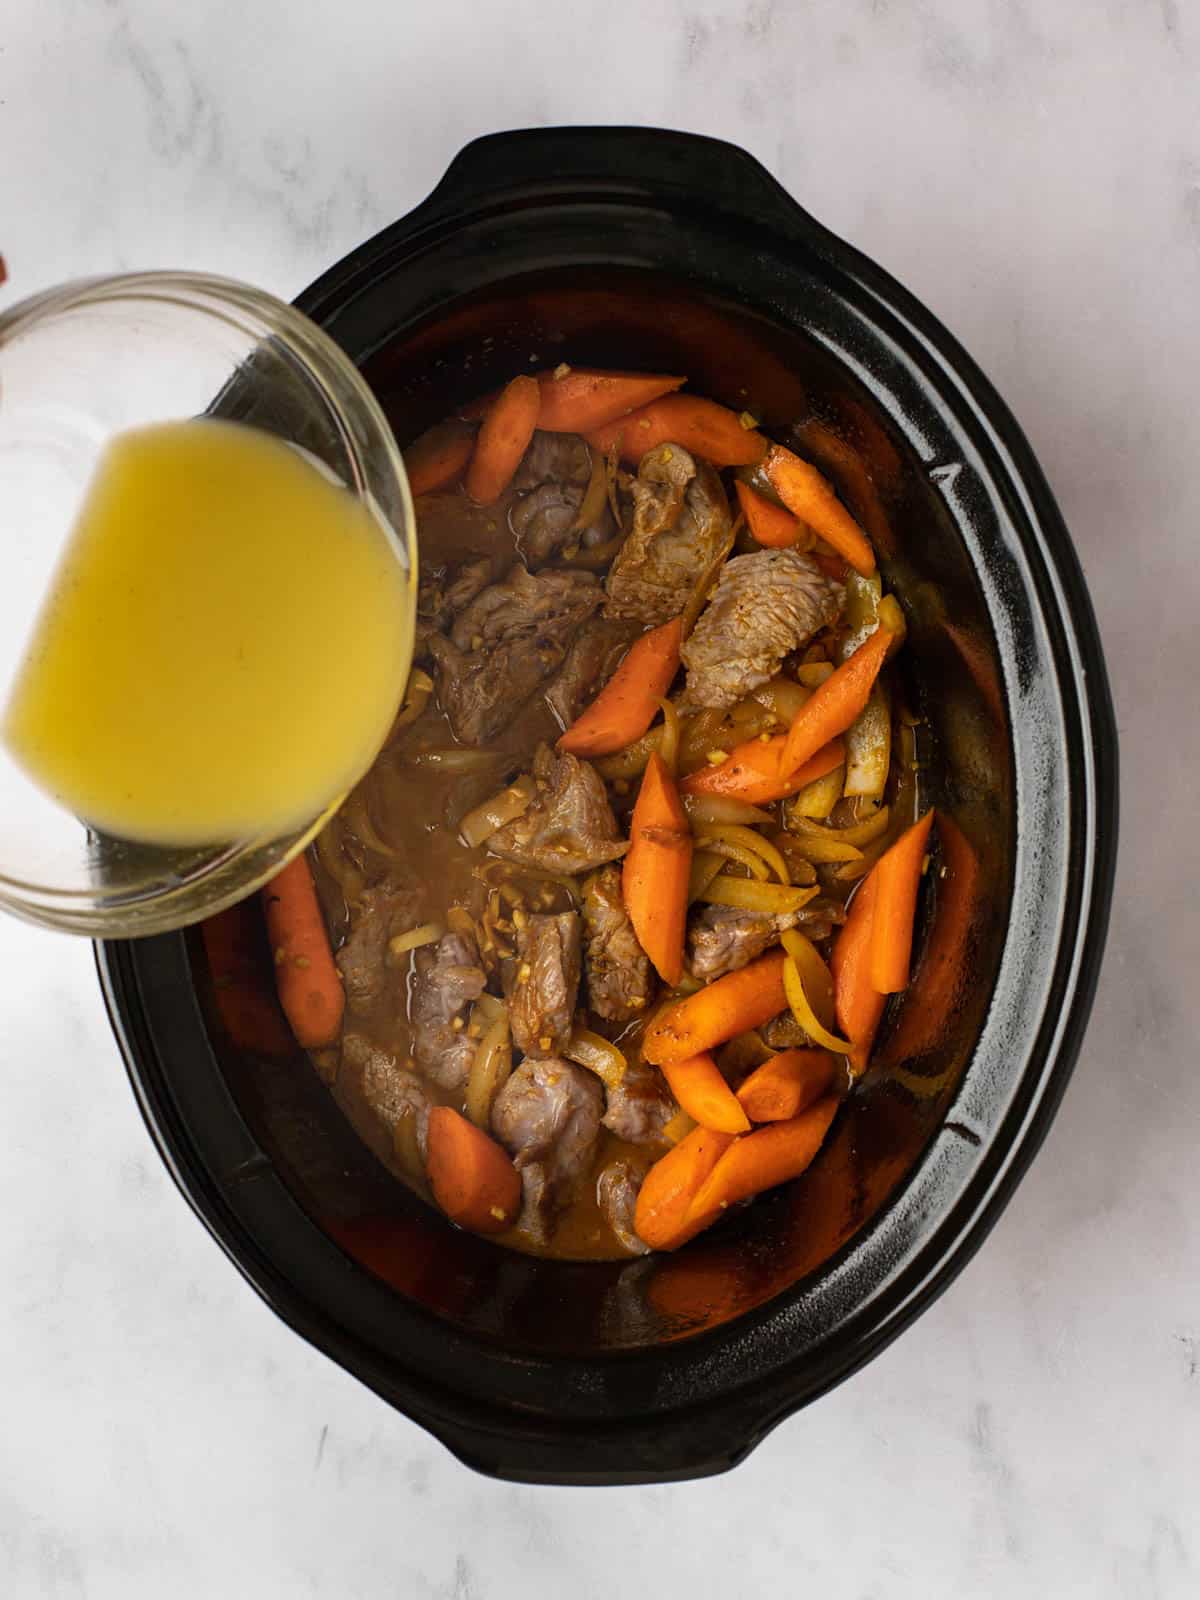 Pouring chicken broth into a slow cooker with lamb, carrots, and onions.